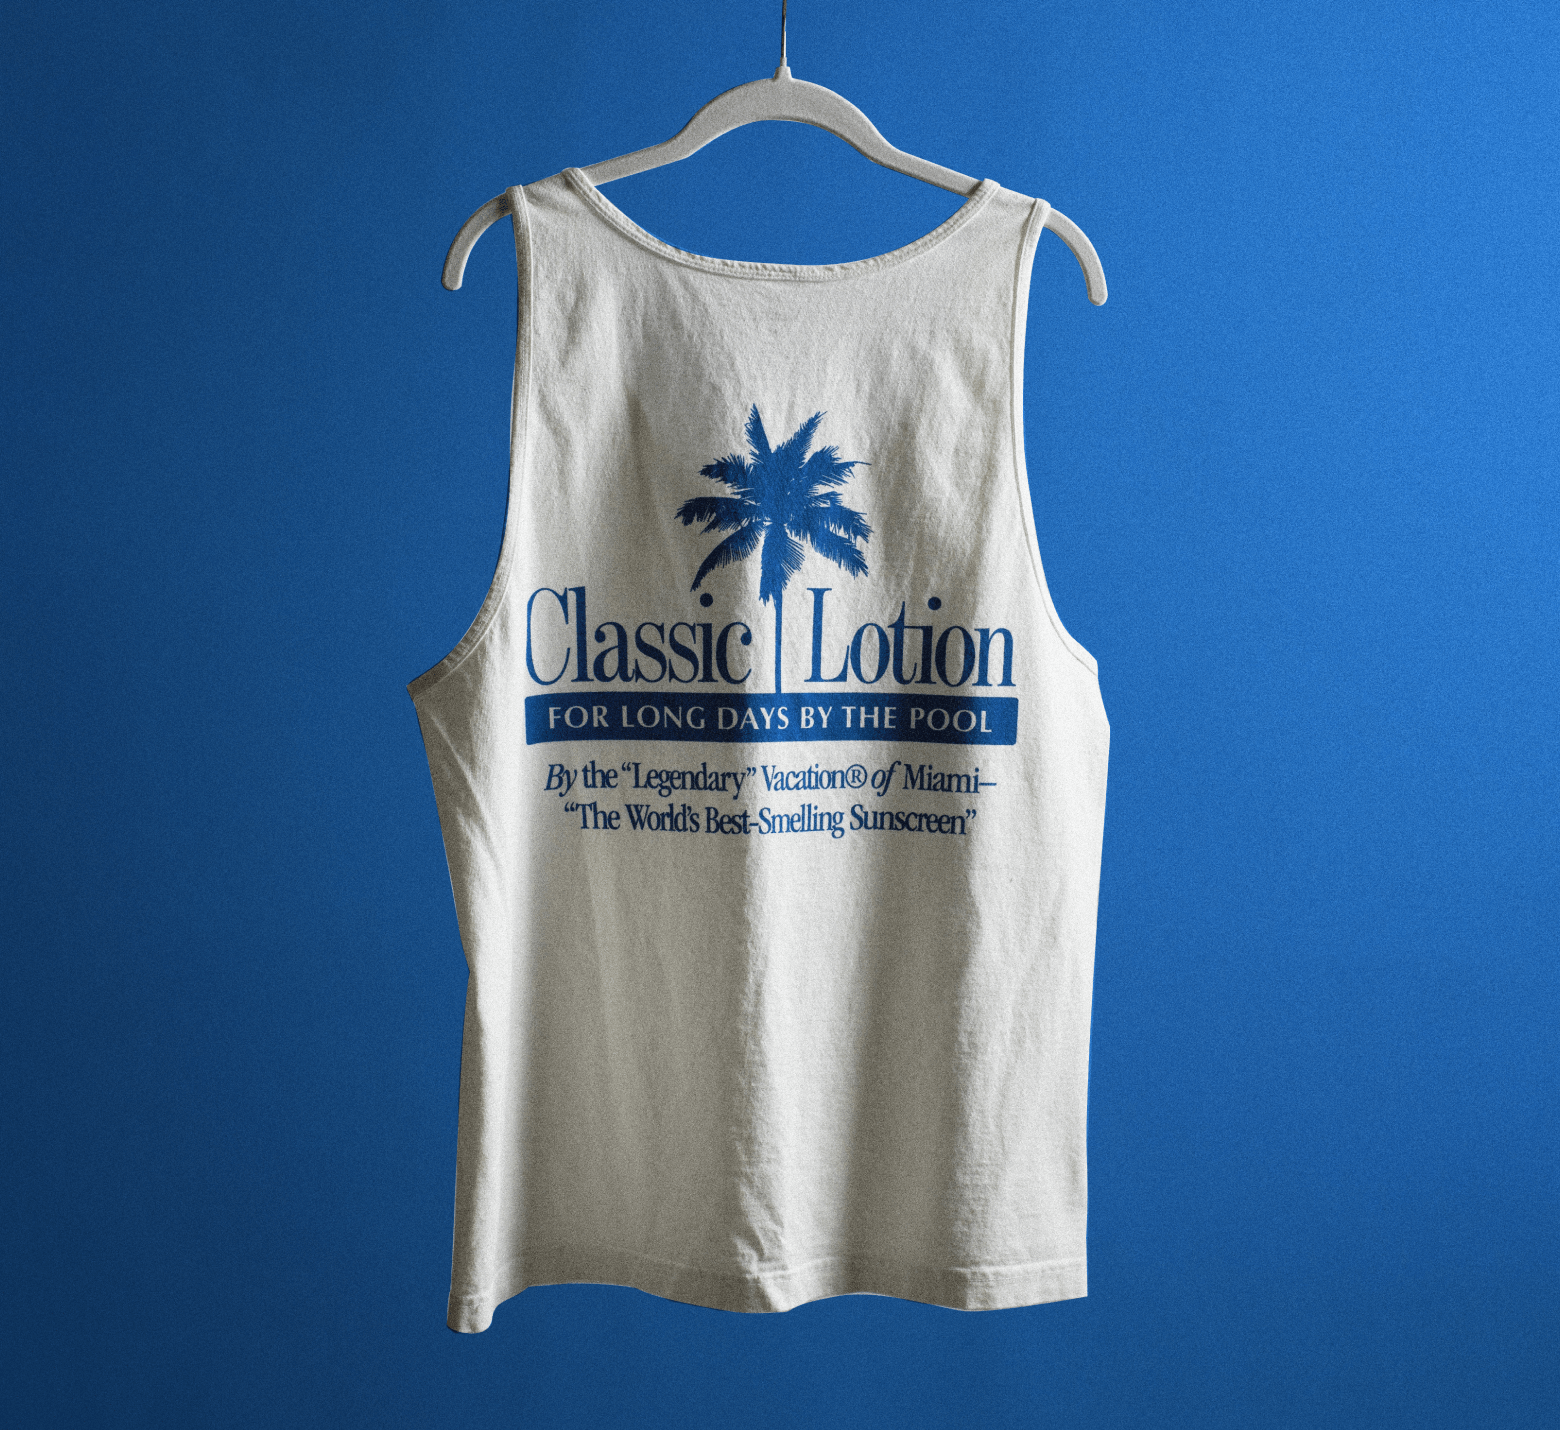 Vacation® White Sleeveless Shirt | The Worlds Best-Smelling Sunscreen |  Vacation®